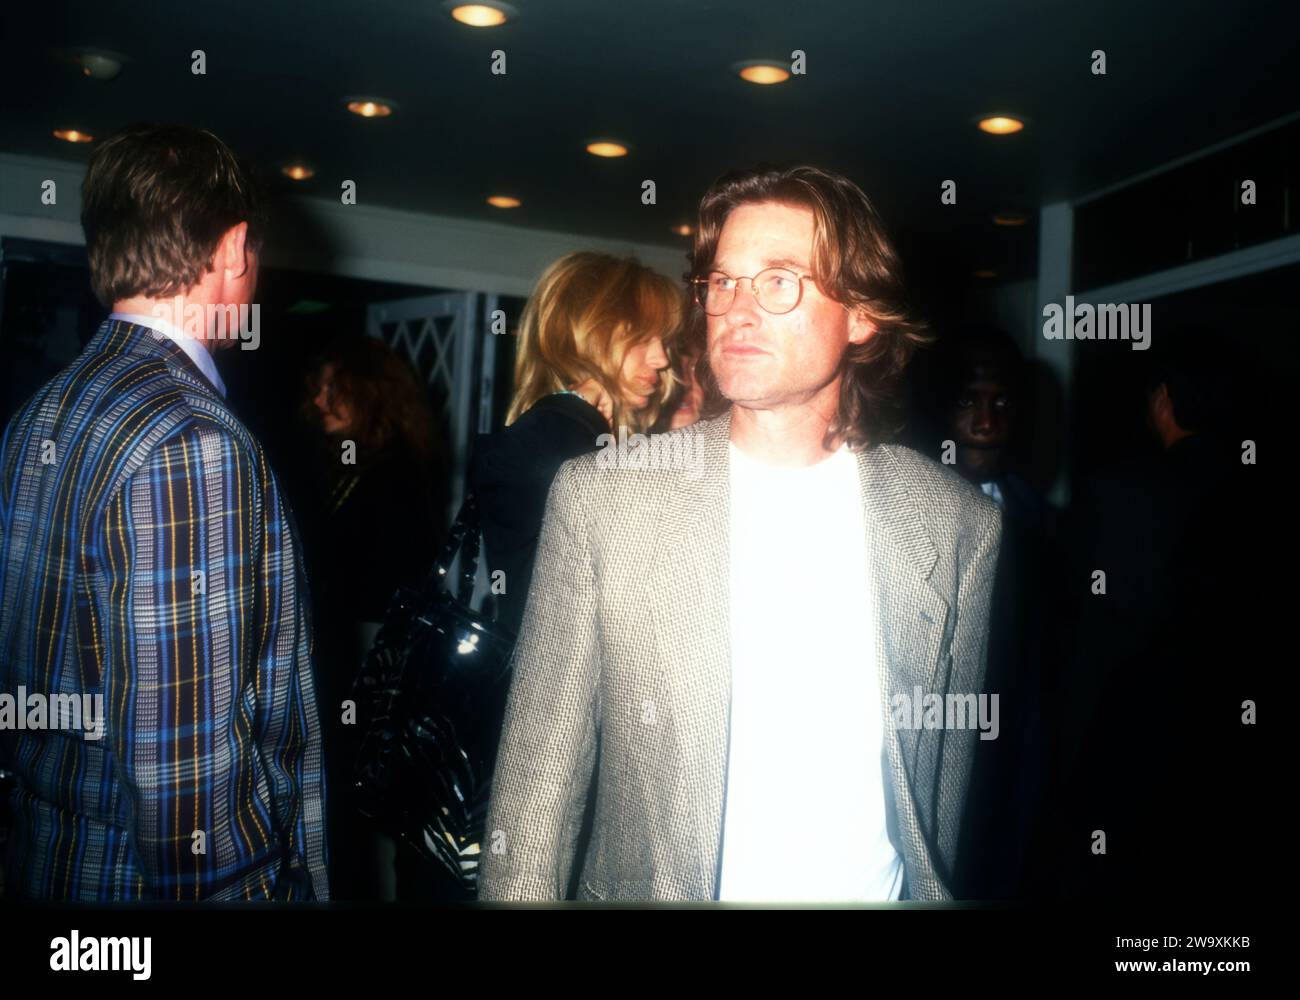 Los Angeles, California, USA 13th October 1996 (Exclusive) Actor Kurt Russell and Actress Goldie Hawn on October 13, 1996 in Los Angeles, California, USA. Photo by Barry King/Alamy Stock Photo Stock Photo